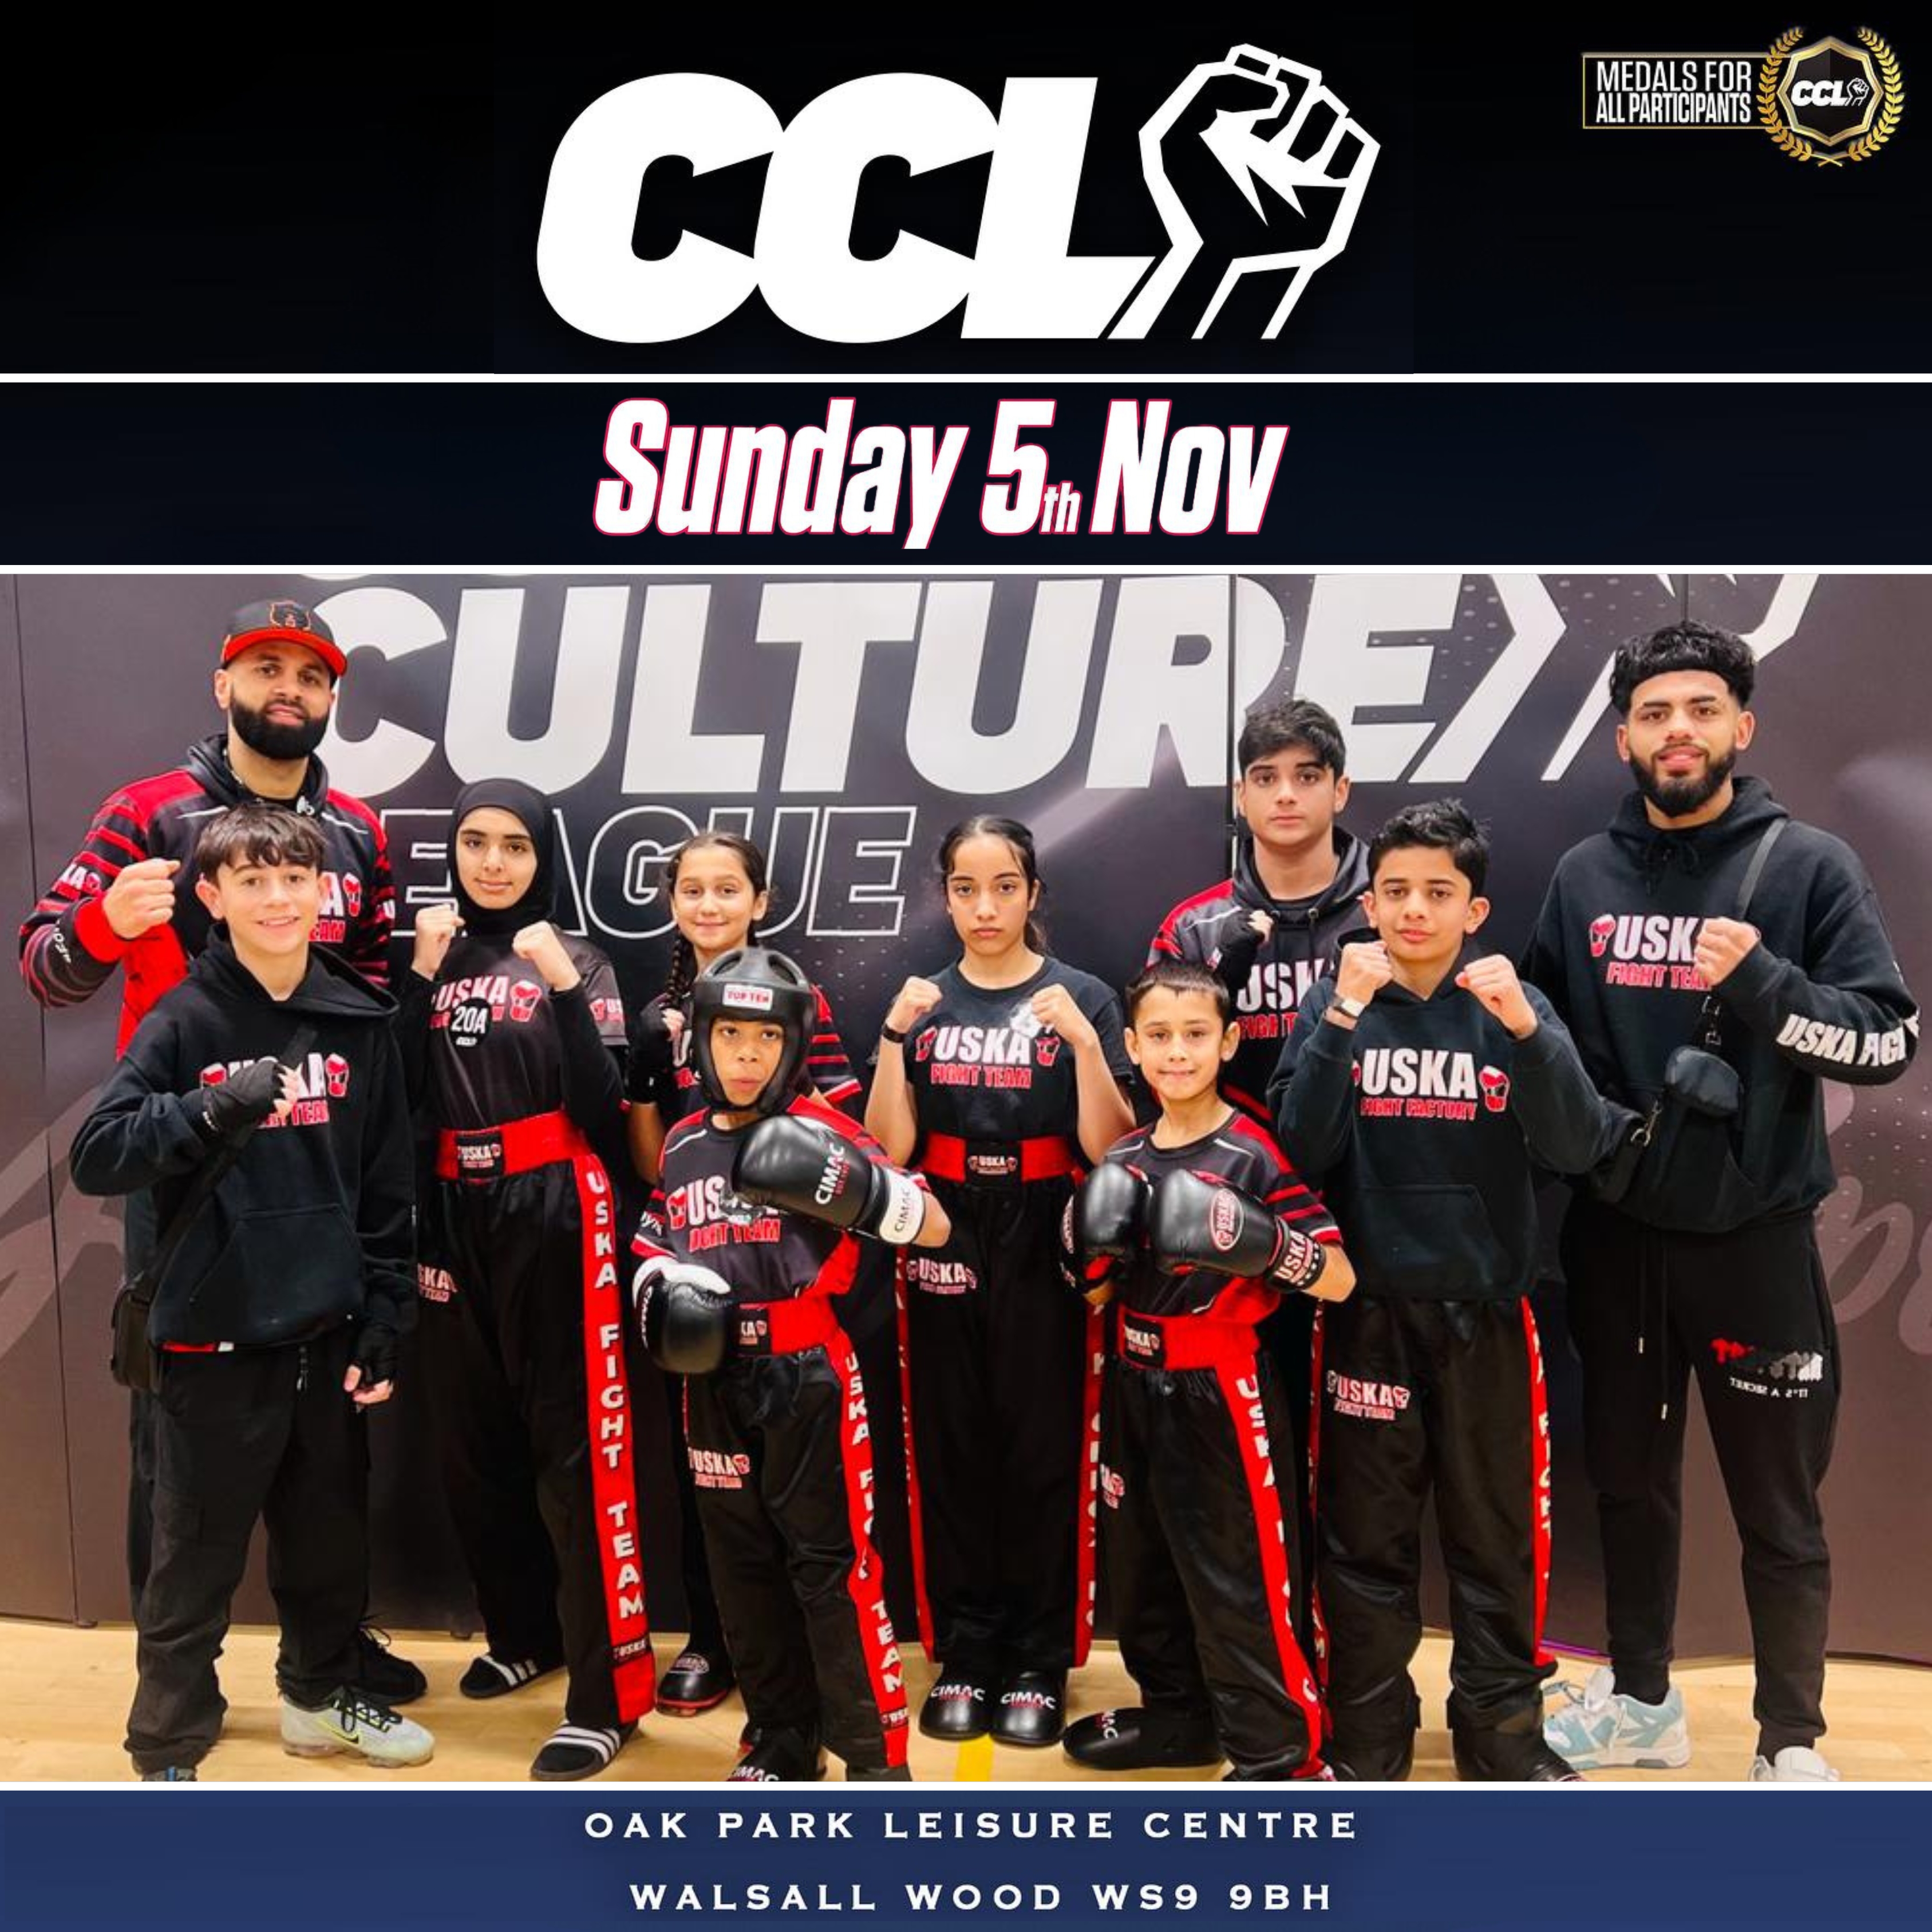 05-11-23 - Great day of development at the Combat Culture League event in Walsall.